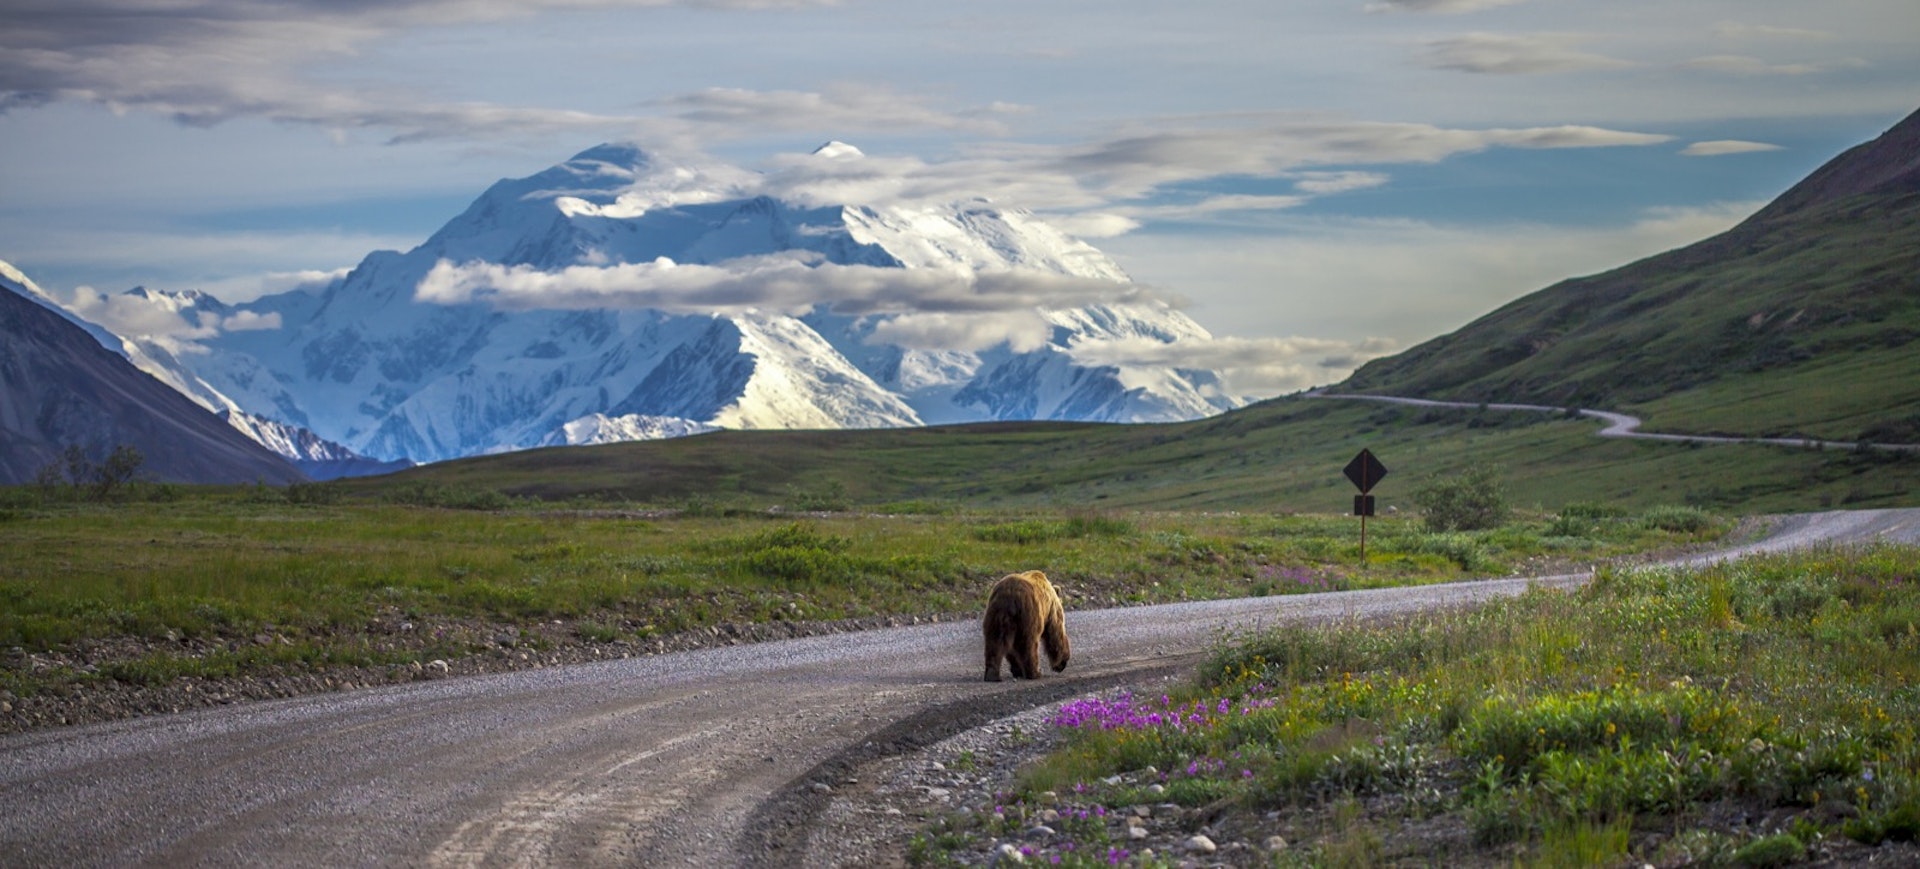 A grizzly bear walks down a road in the late evening when Denali (or Mount McKinley) was in full view. The Mountain is one of several supersized natural wonders in the US National Parks system.